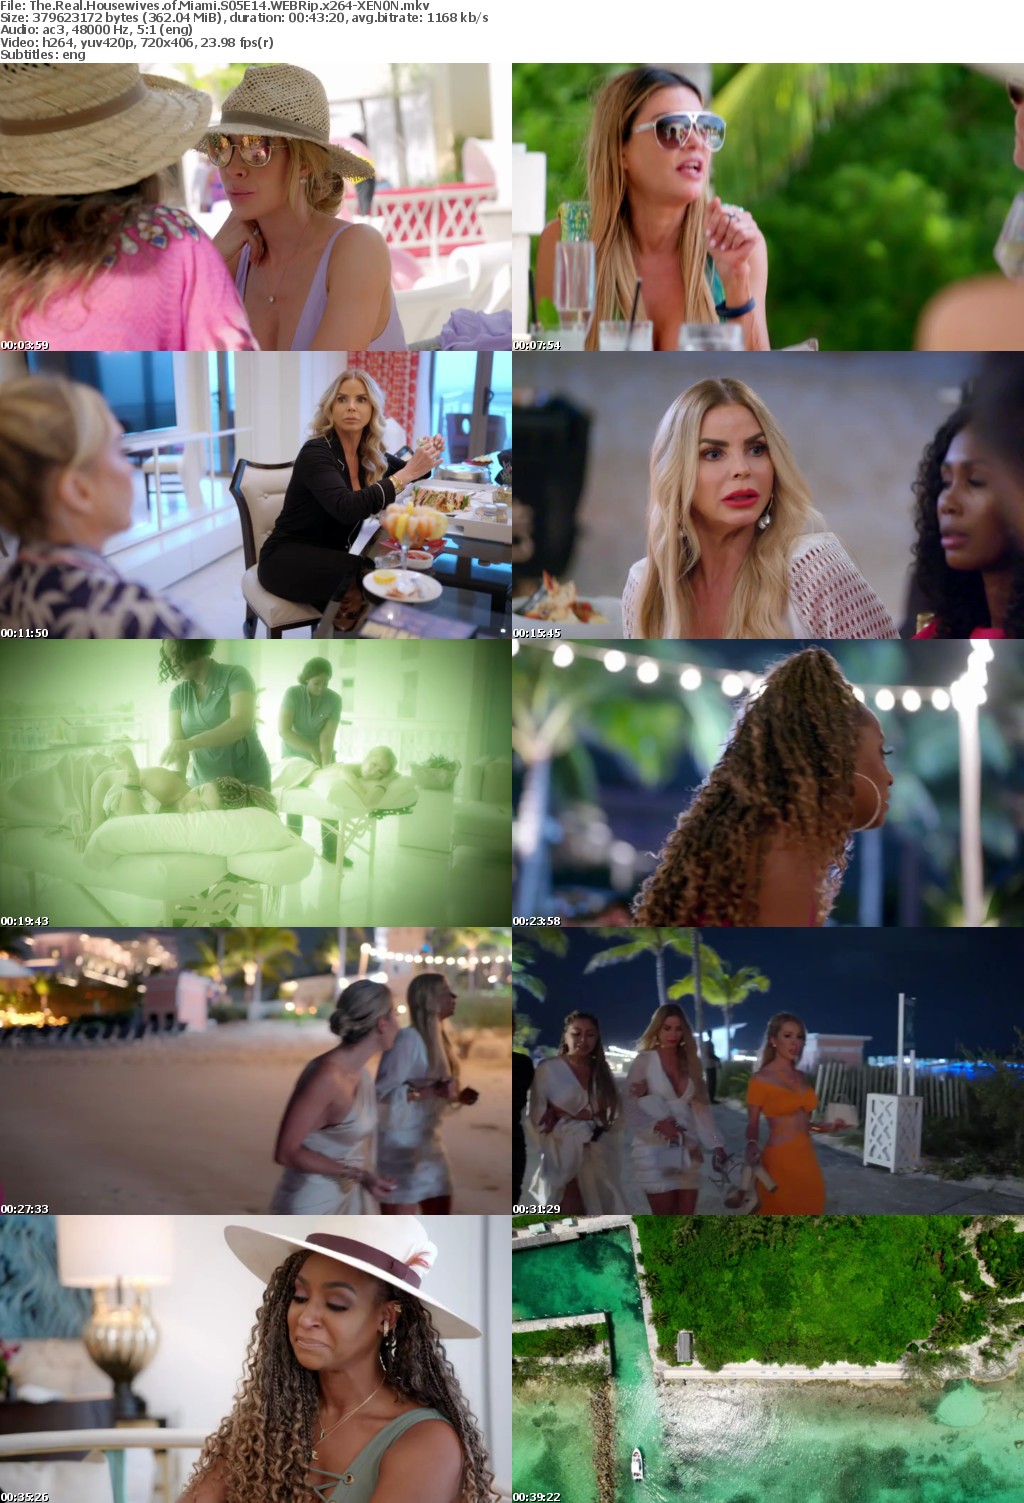 The Real Housewives of Miami S05E14 WEBRip x264-XEN0N